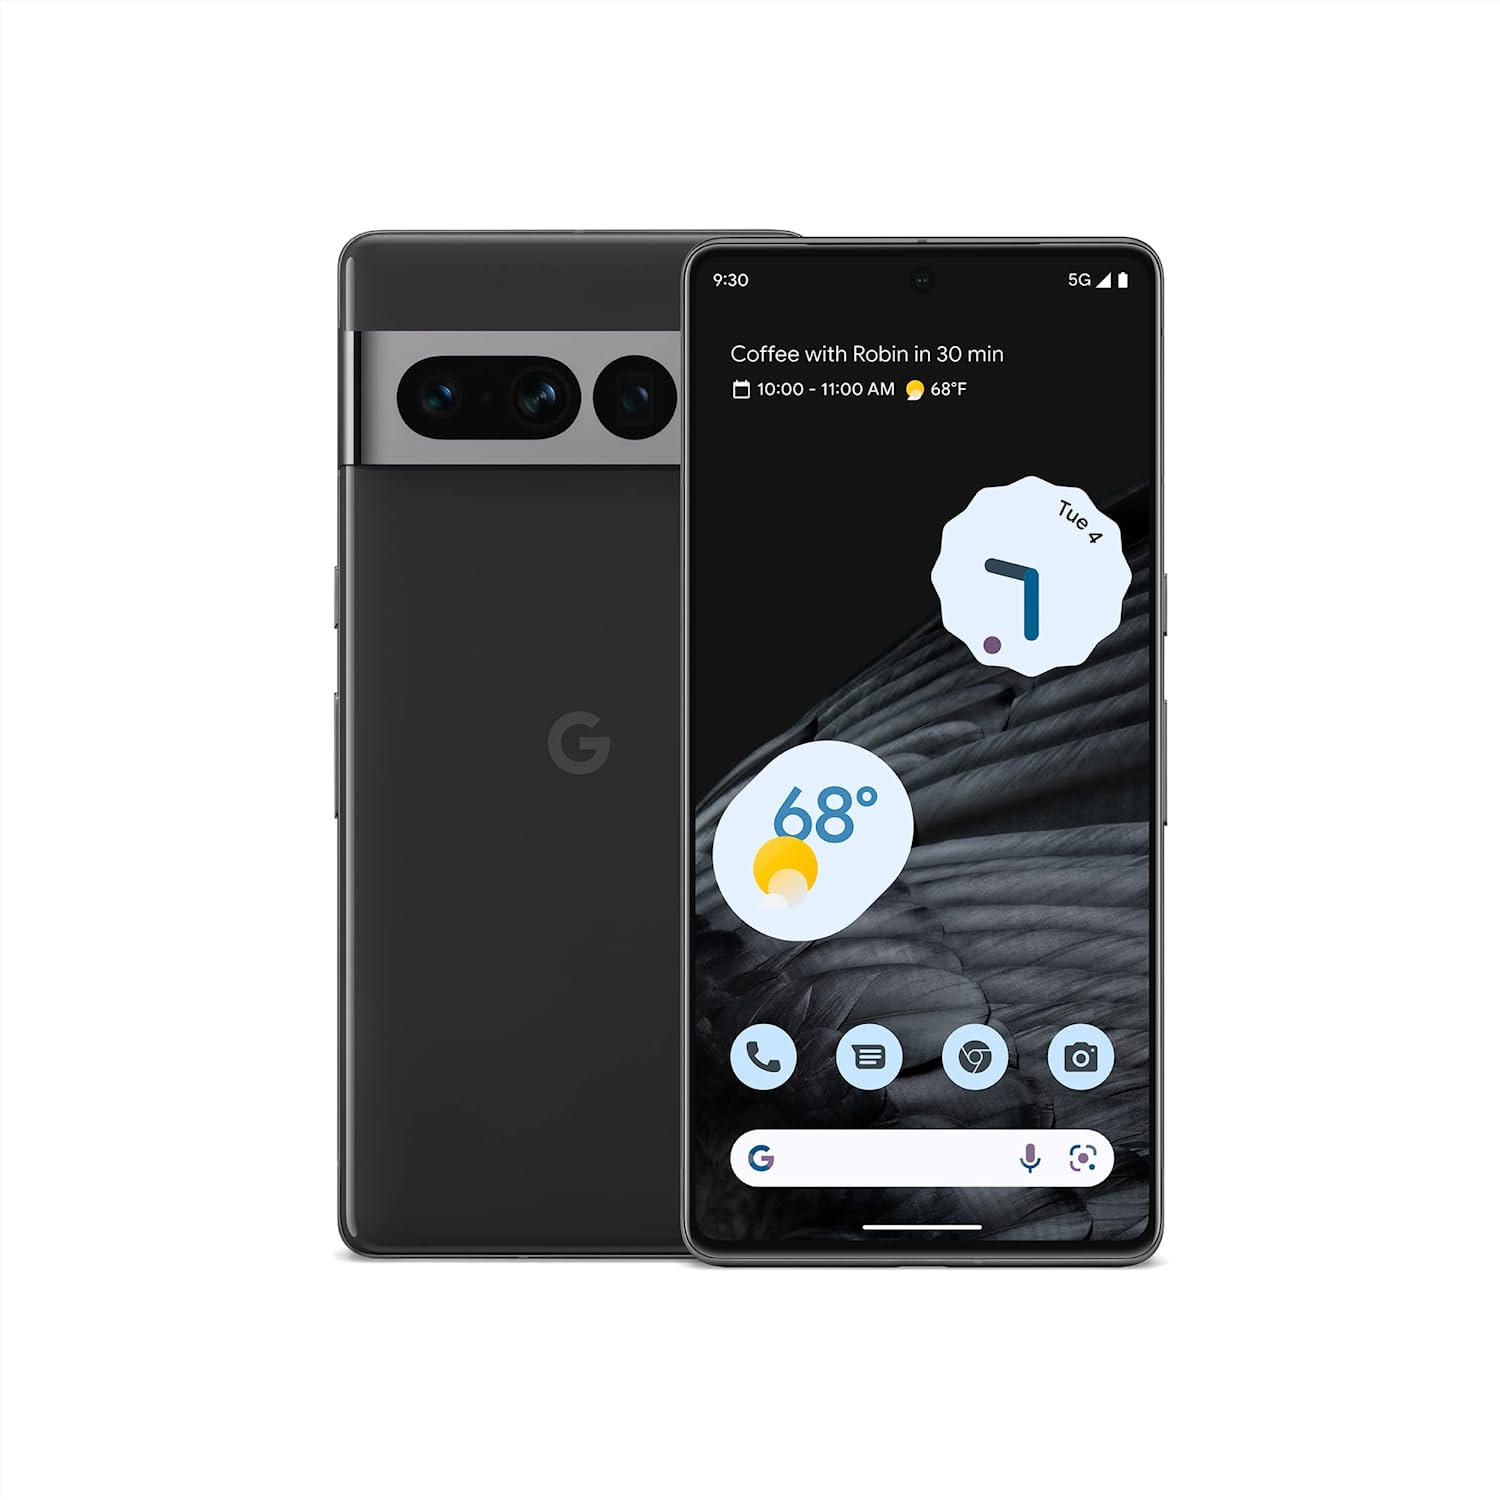 This image shows the Google Pixel 7 Pro.